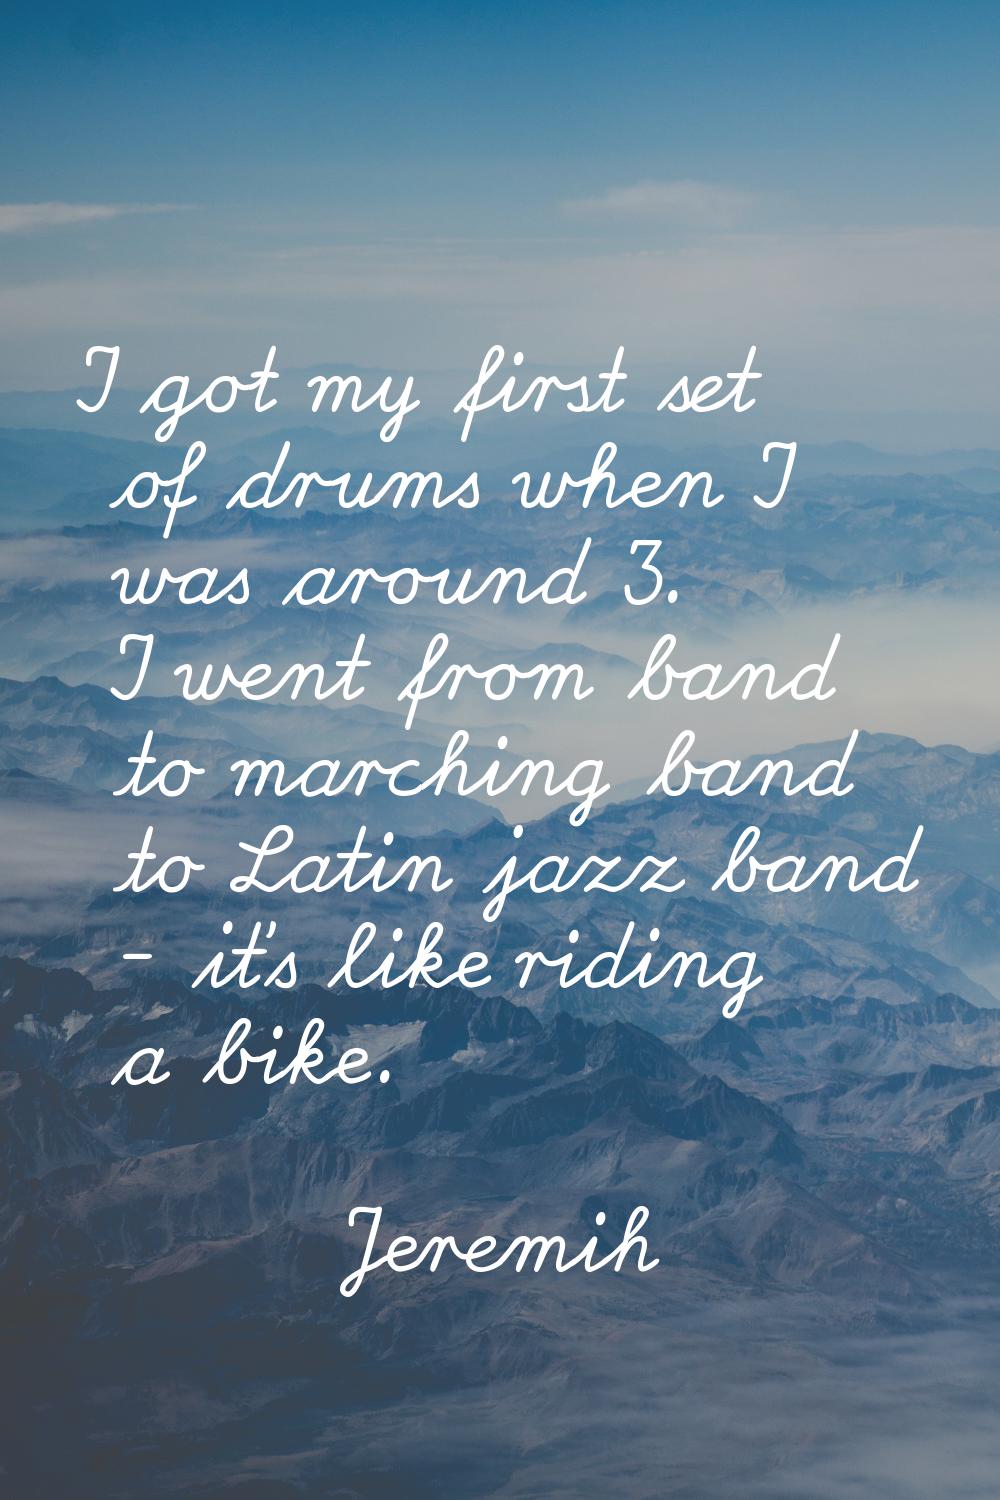 I got my first set of drums when I was around 3. I went from band to marching band to Latin jazz ba